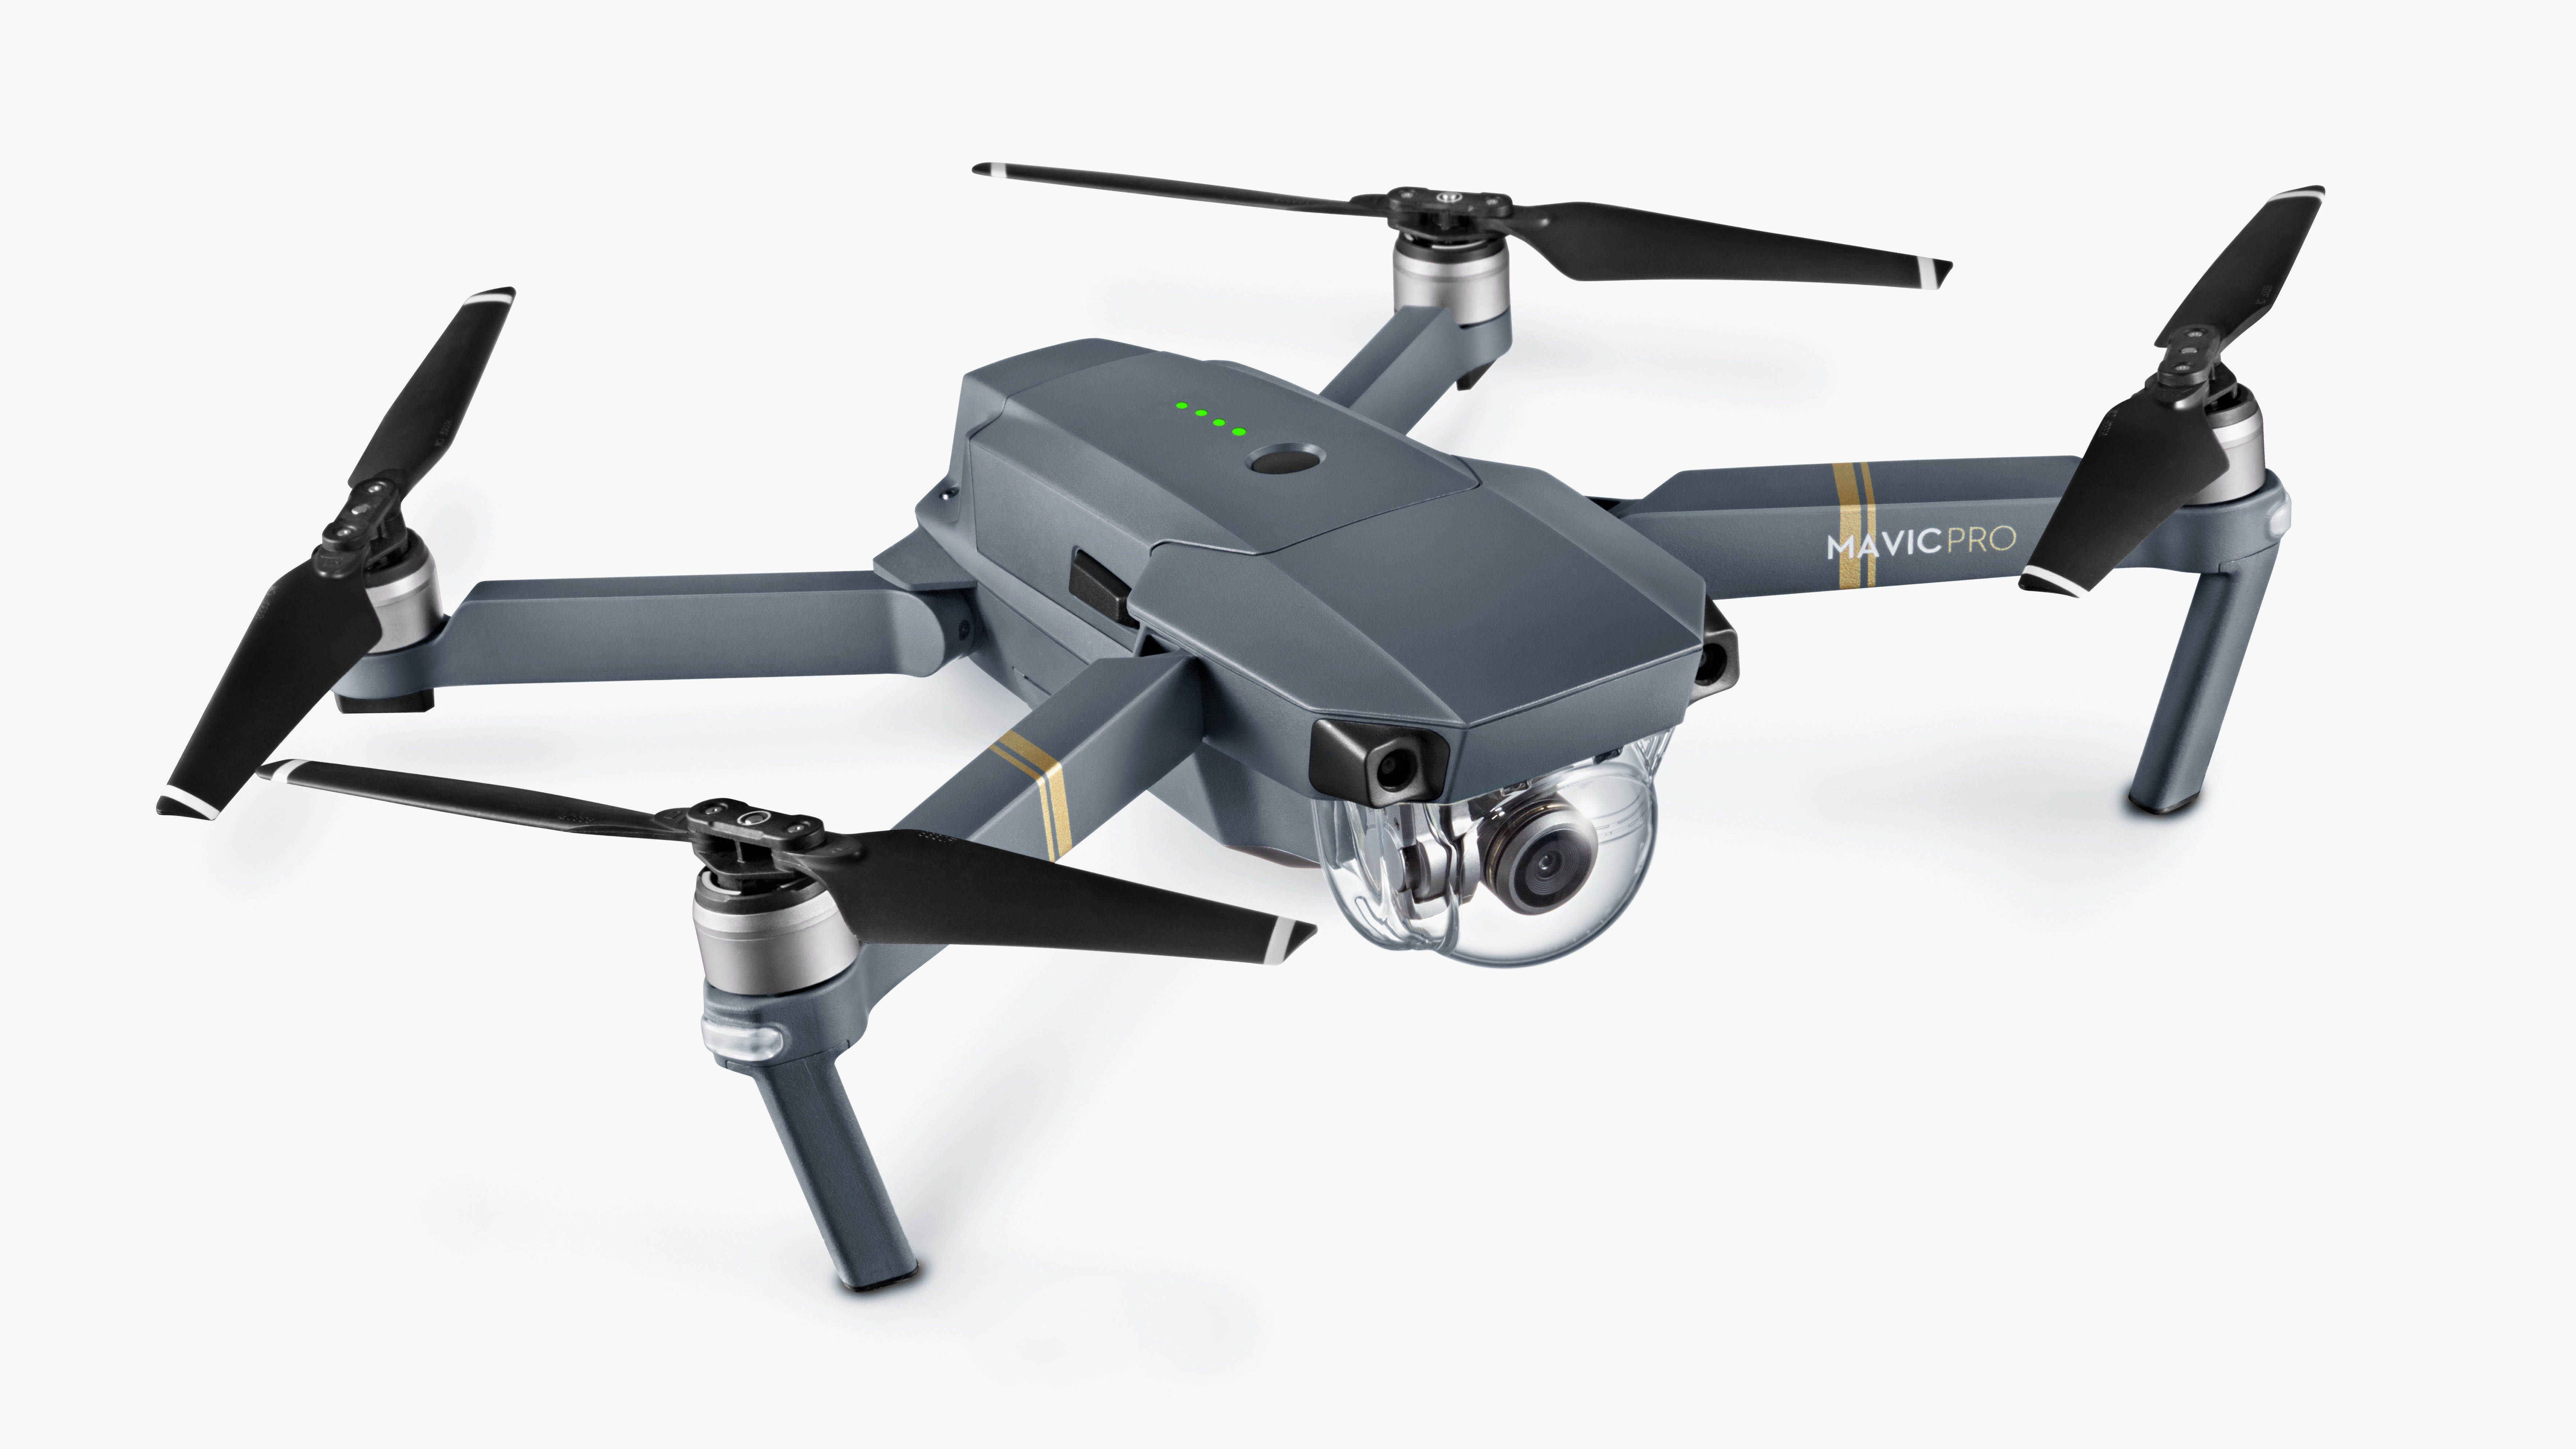 The DJI MAVIC PRO is probably the first drone you'll own | G Style Magazine